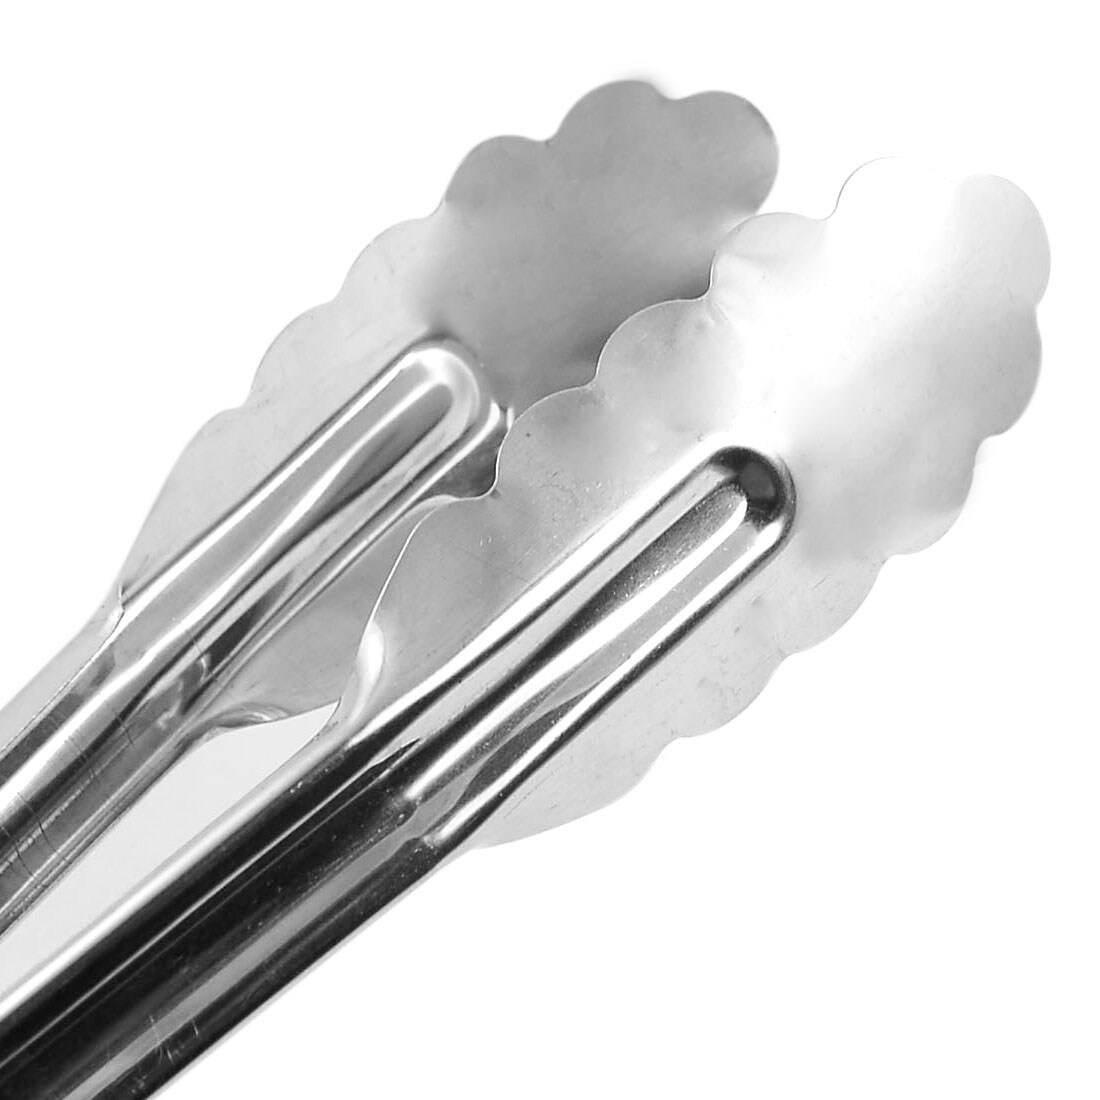 Metal Clip BBQ Barbecue Buffet Meat Bread Food Locking Tongs Silver Tone 3PCS - Silver Tone